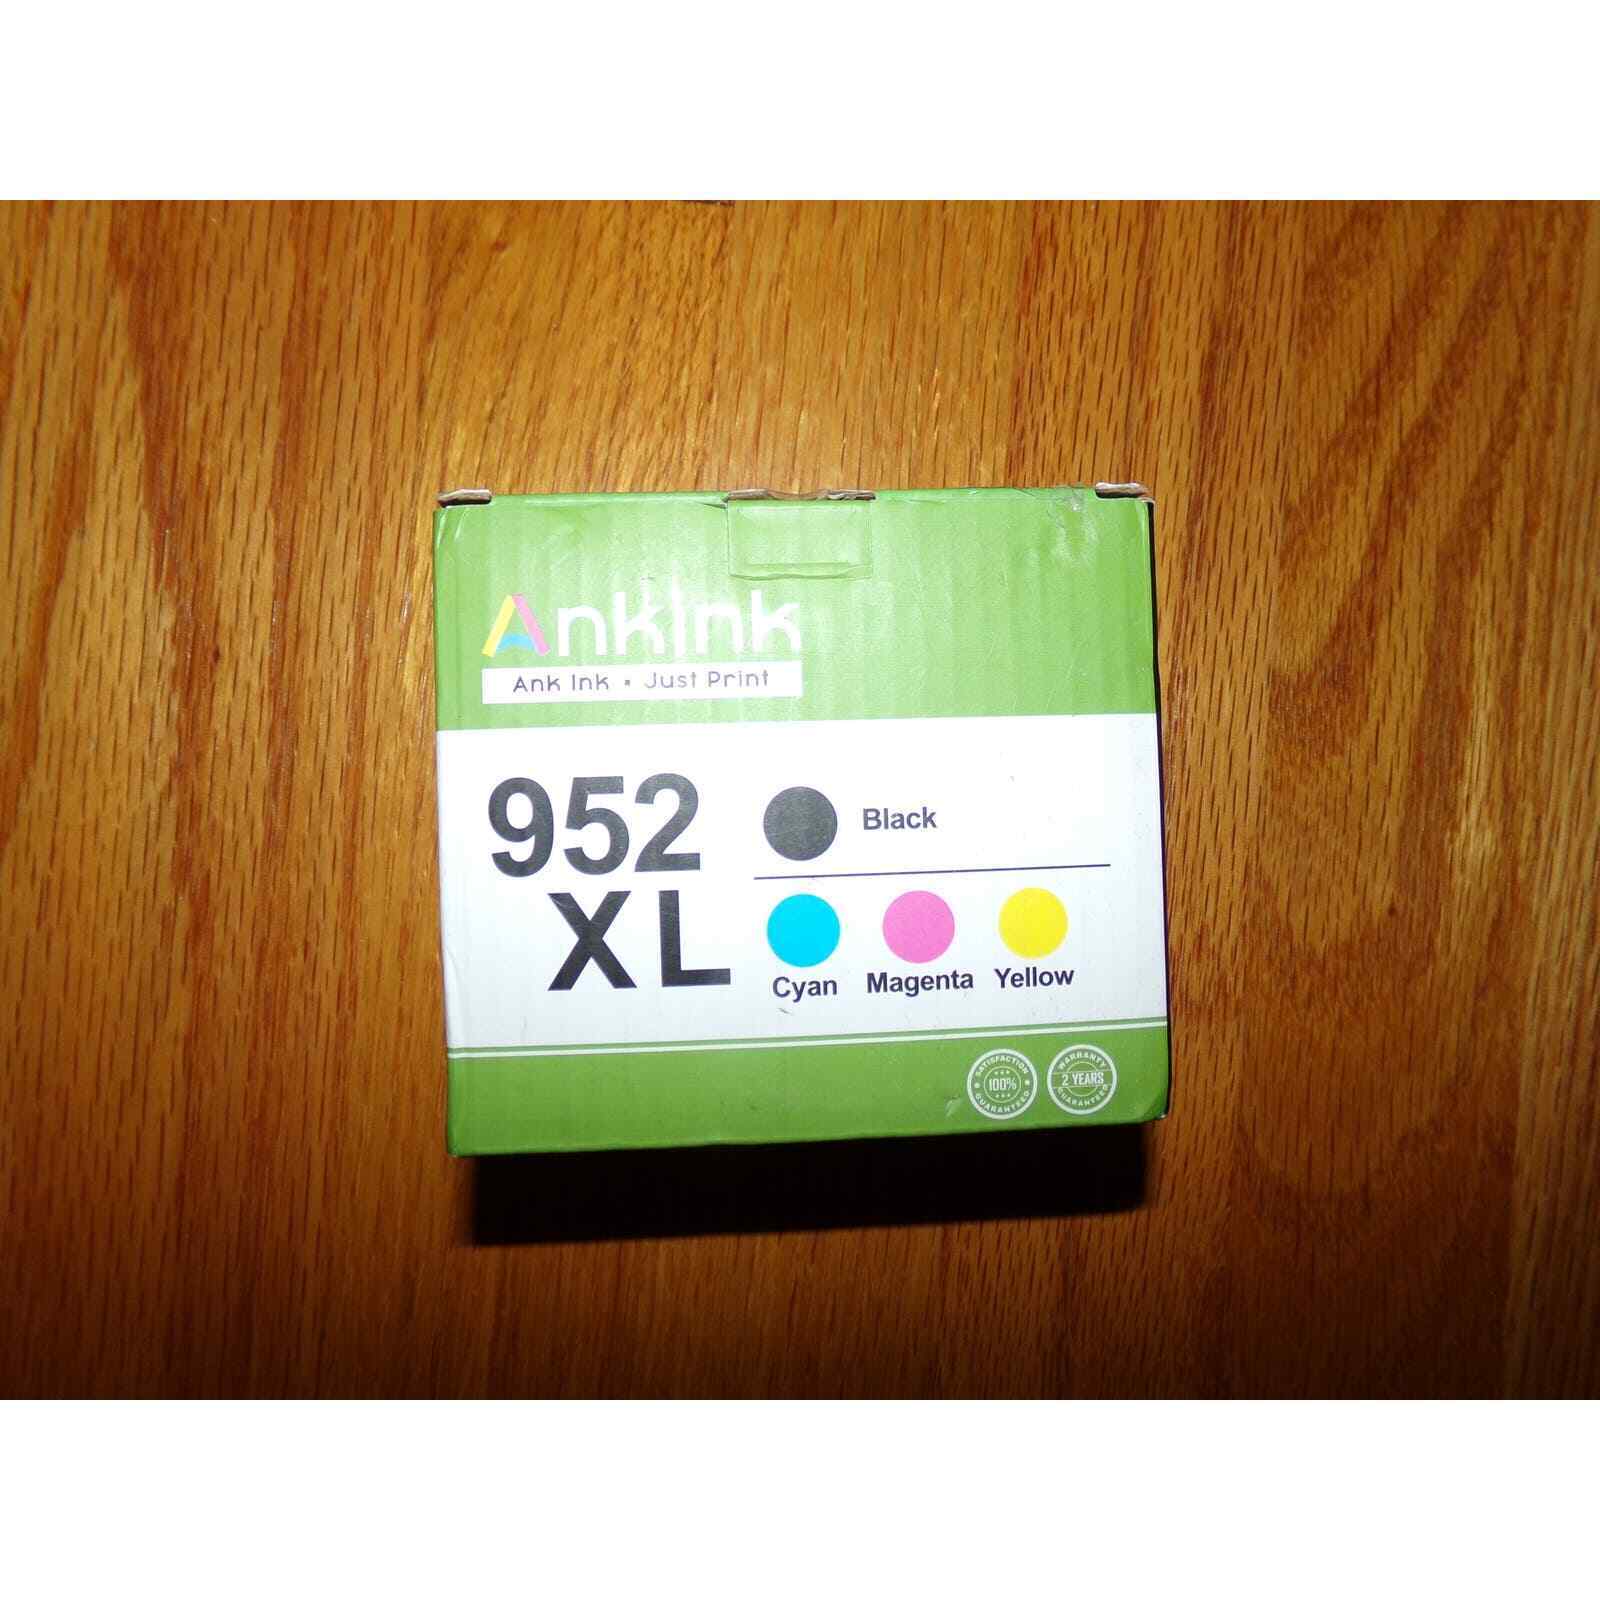 New in Box Ankink 952XL complete set ink cartridges 